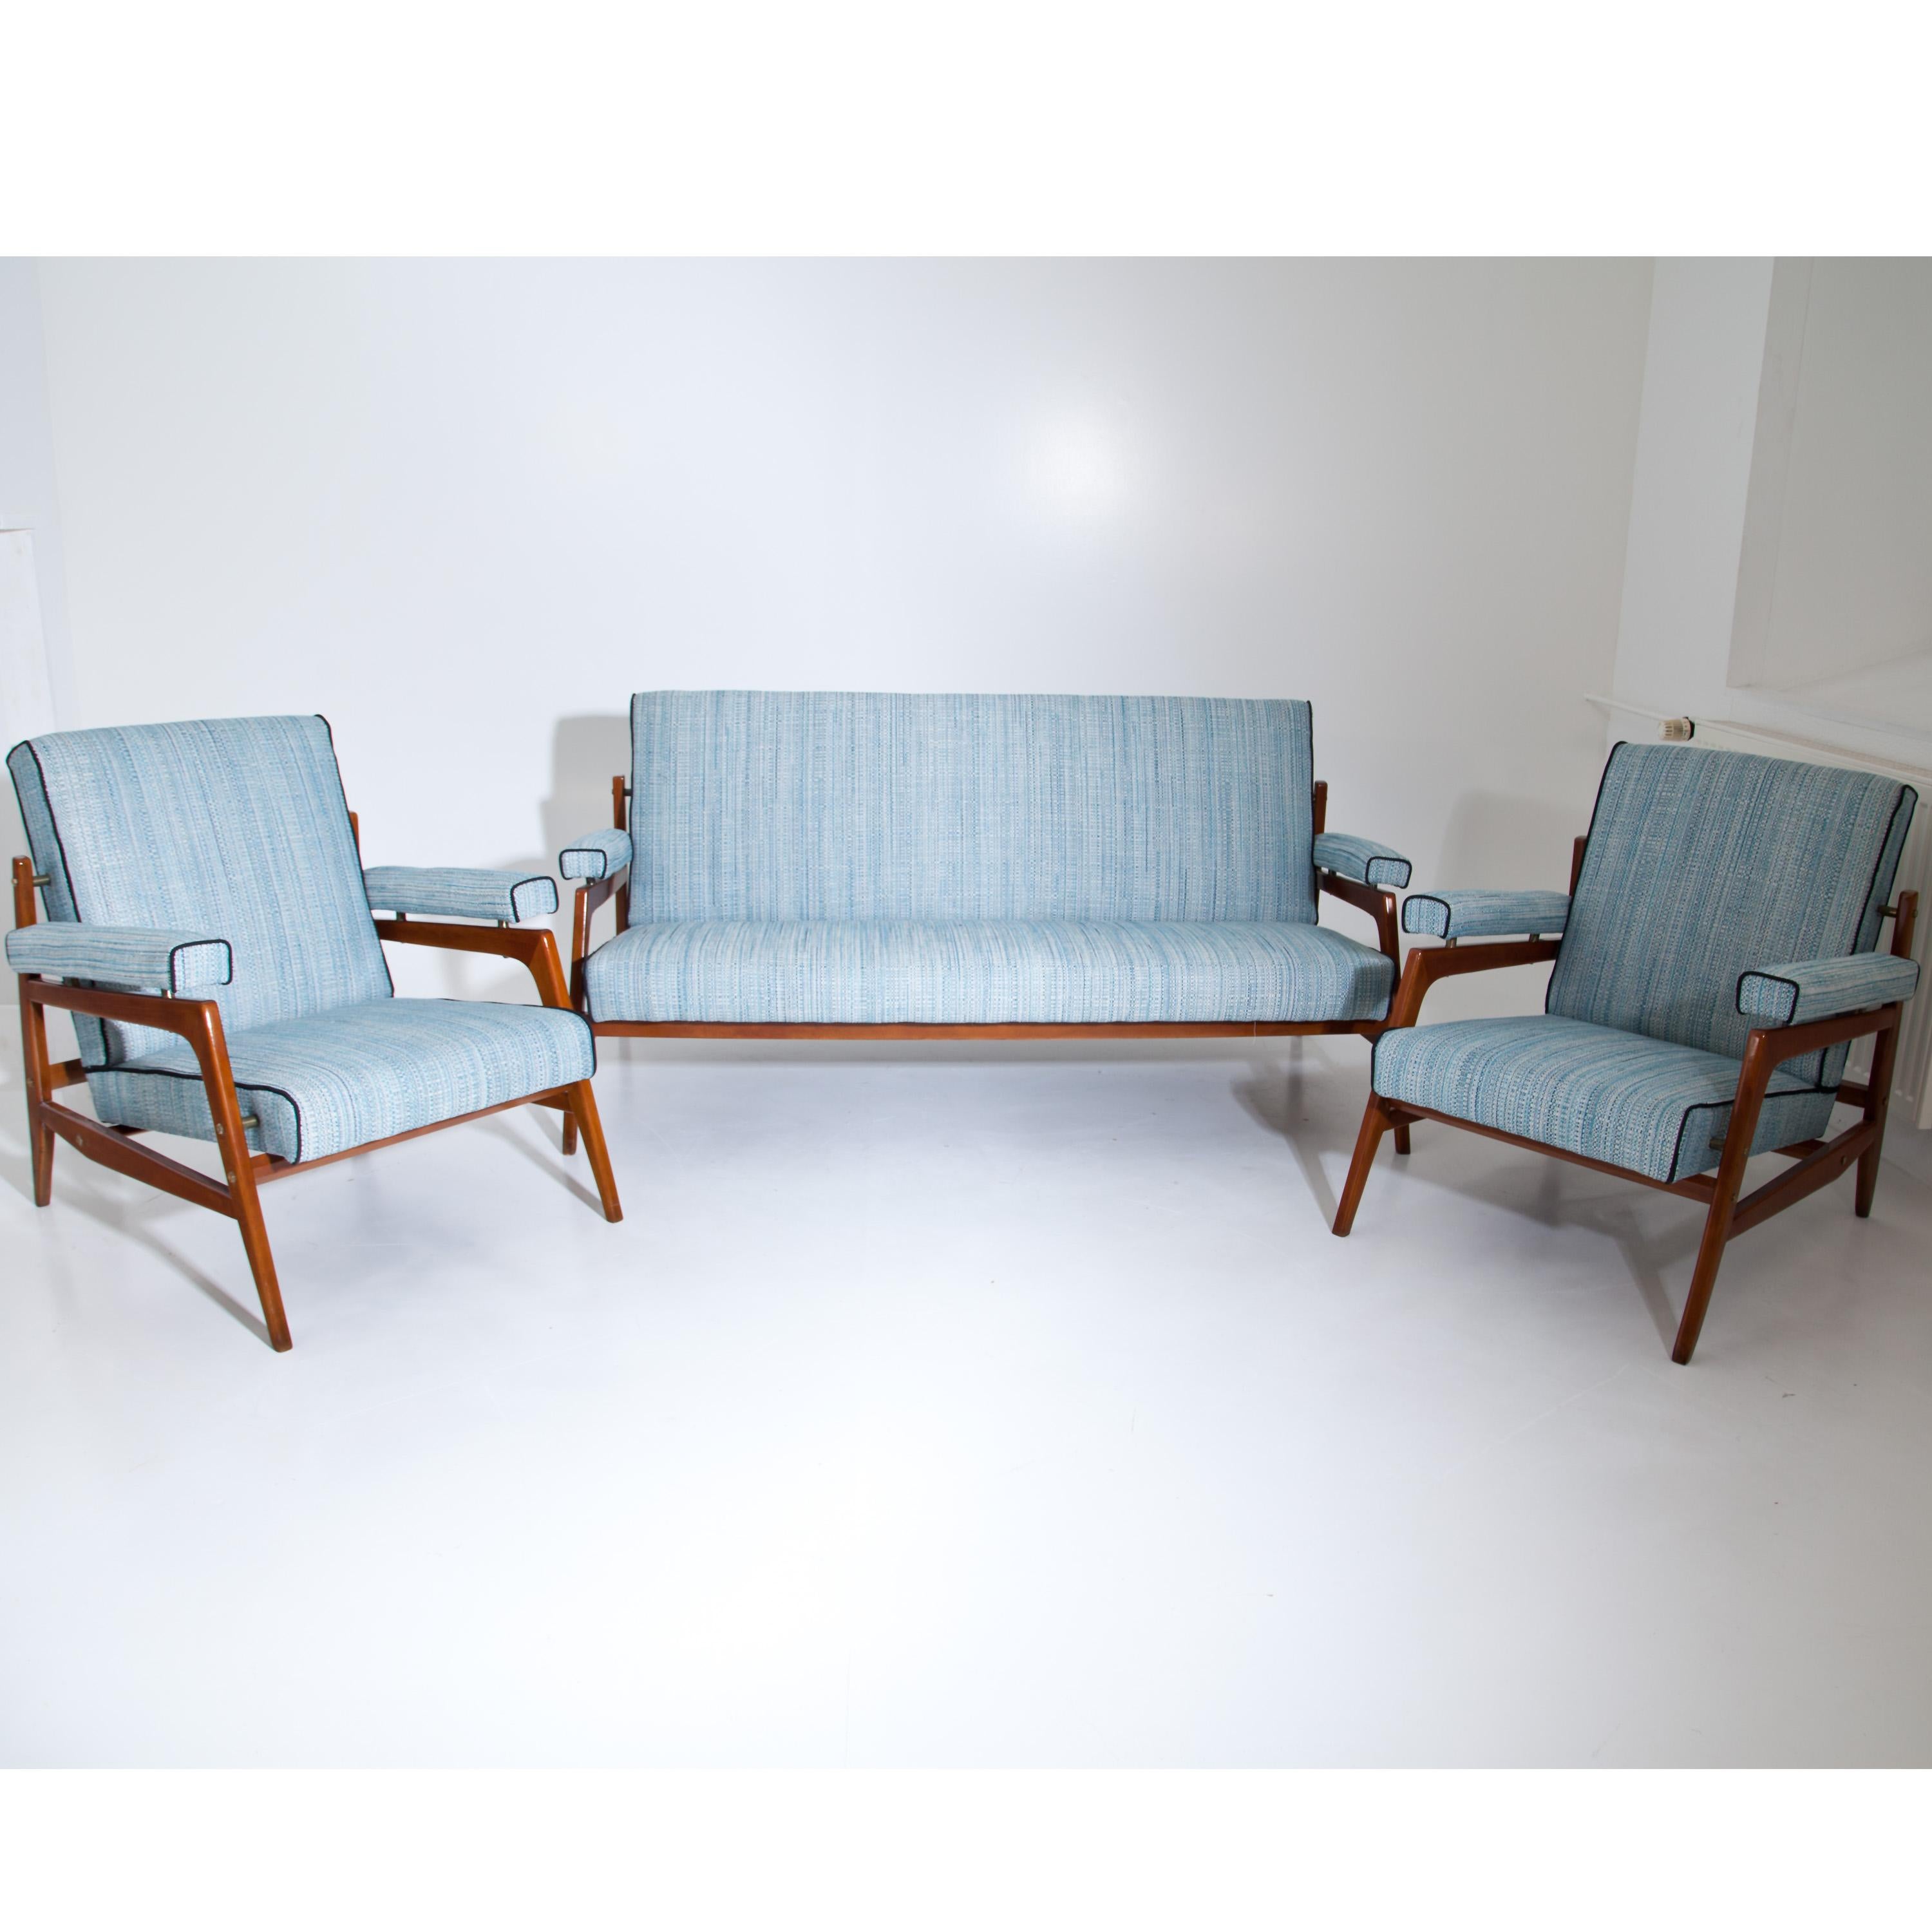 Midcentury seating group consisting of a two-seat sofa and two armchairs. The armrests, seats and backrests are upholstered and newly covered with a light blue fabric with black piping. The smooth wooden construction has recently been polished.